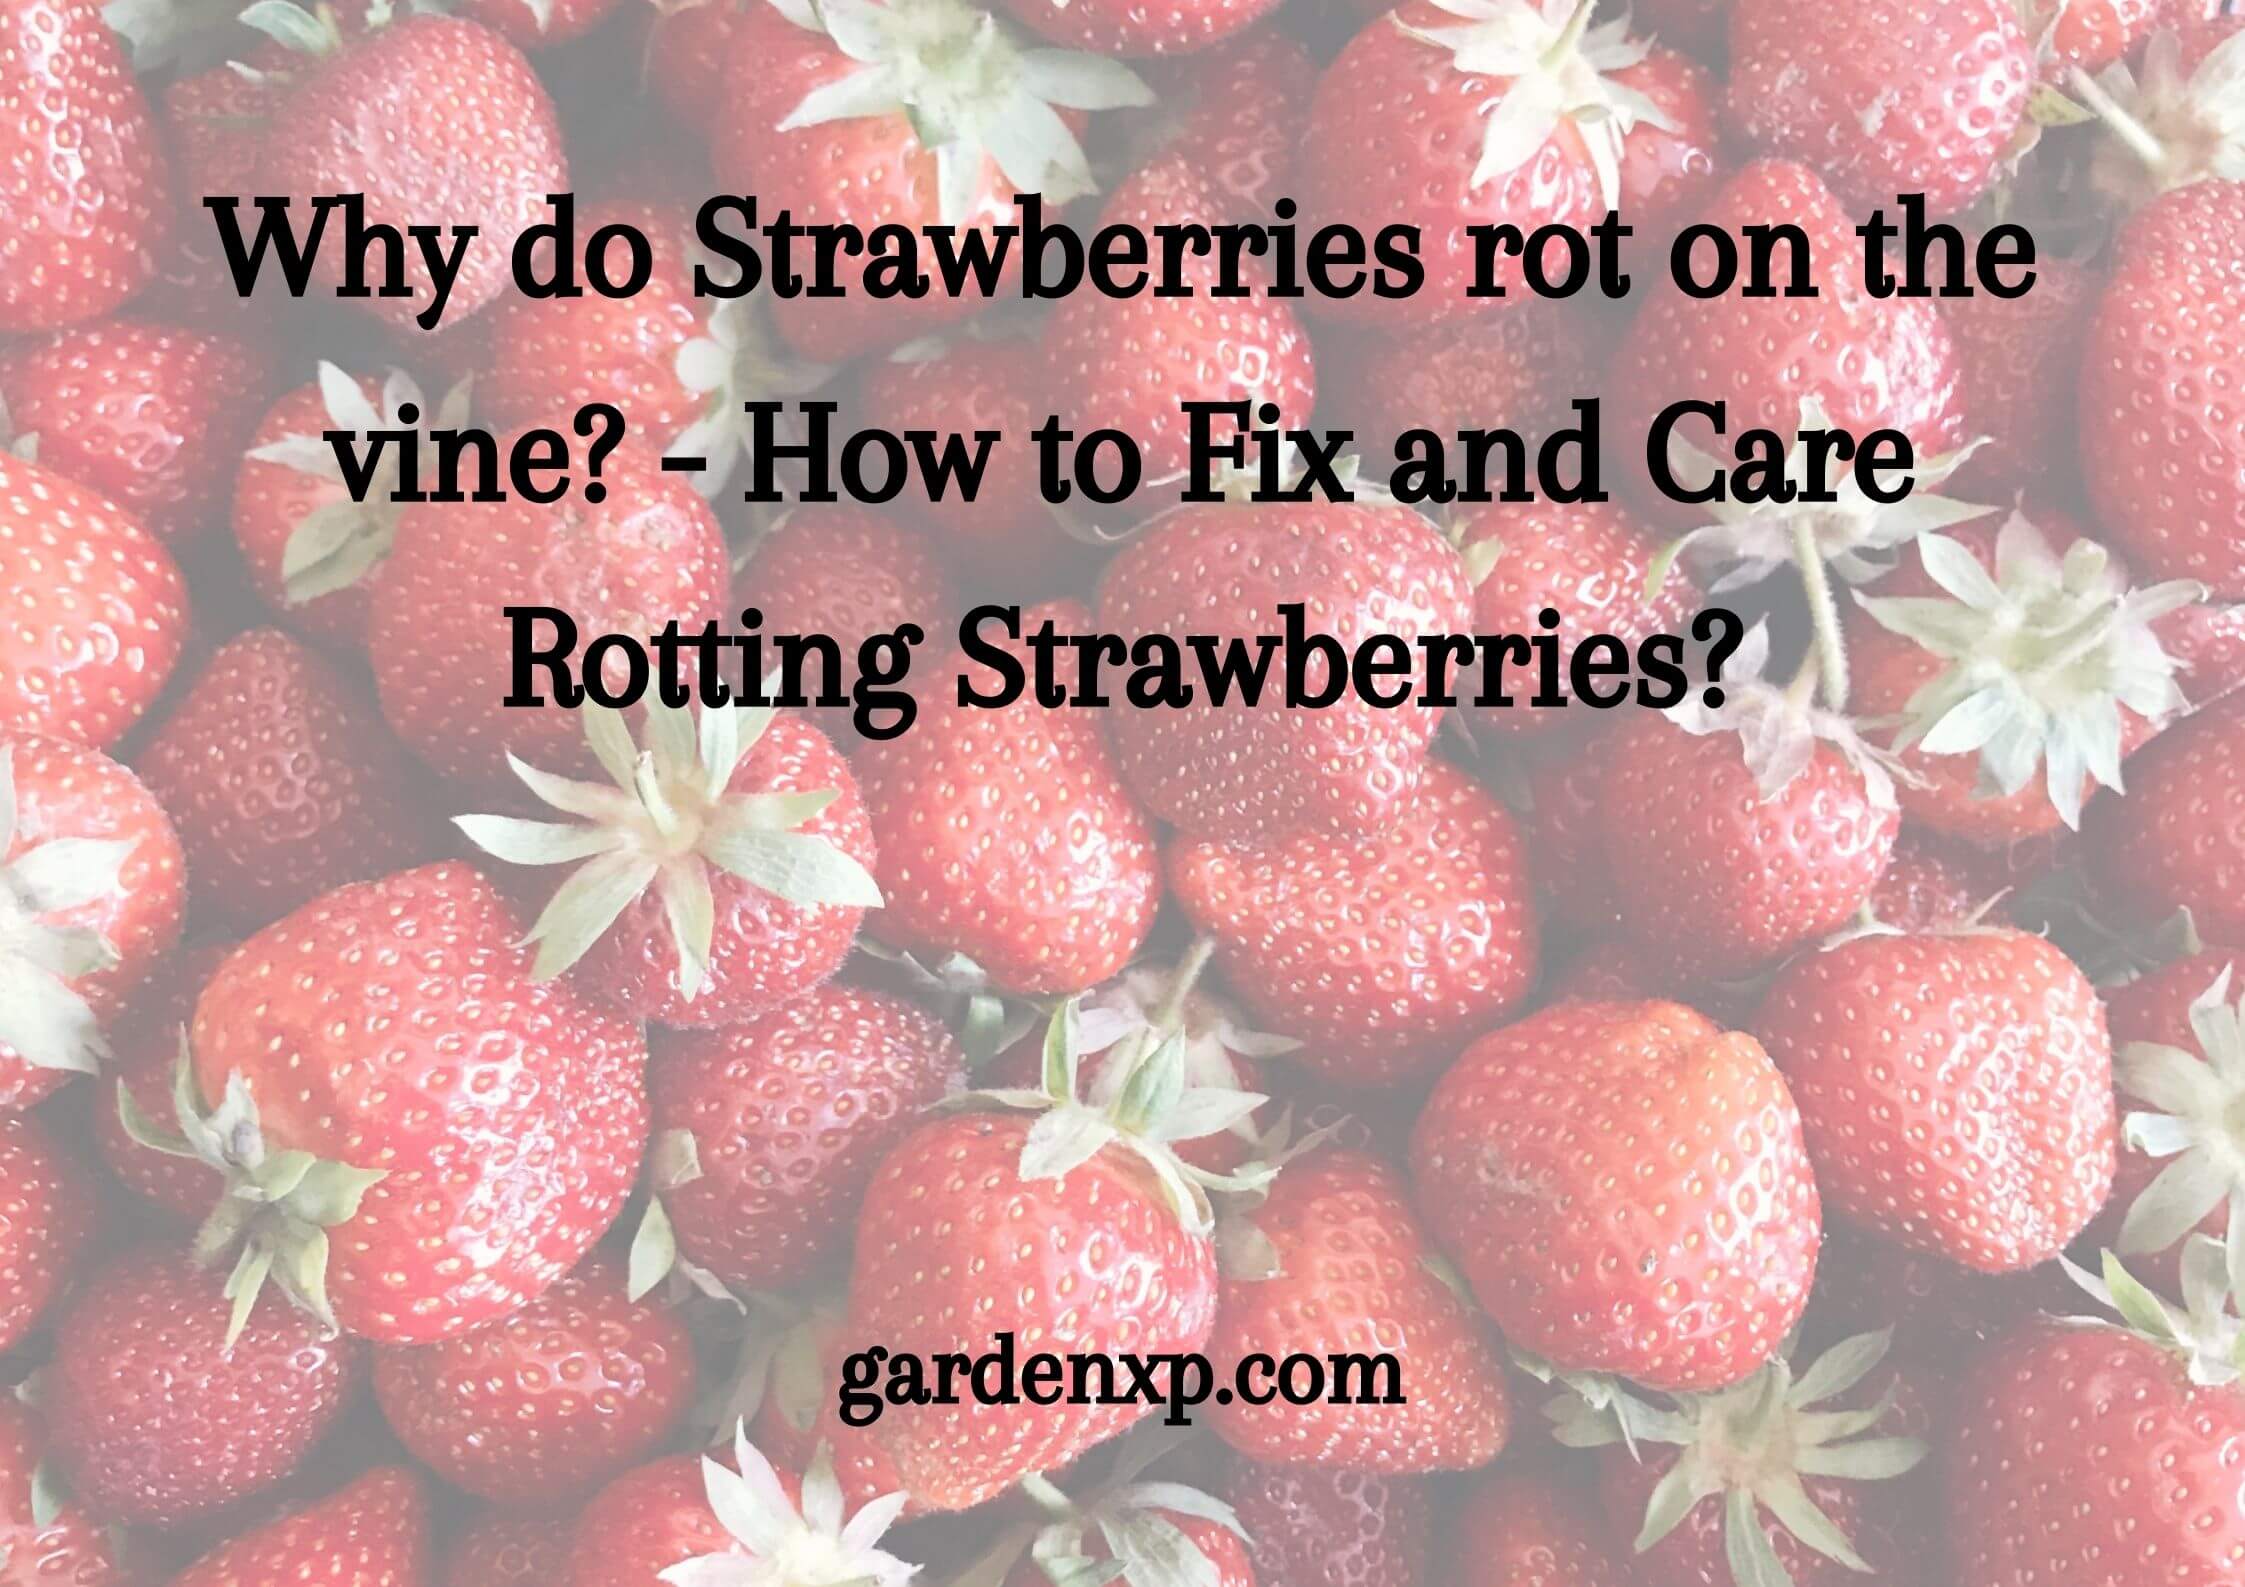 Why do Strawberries rot on the vine? - How to Fix and Care Rotting Strawberries?